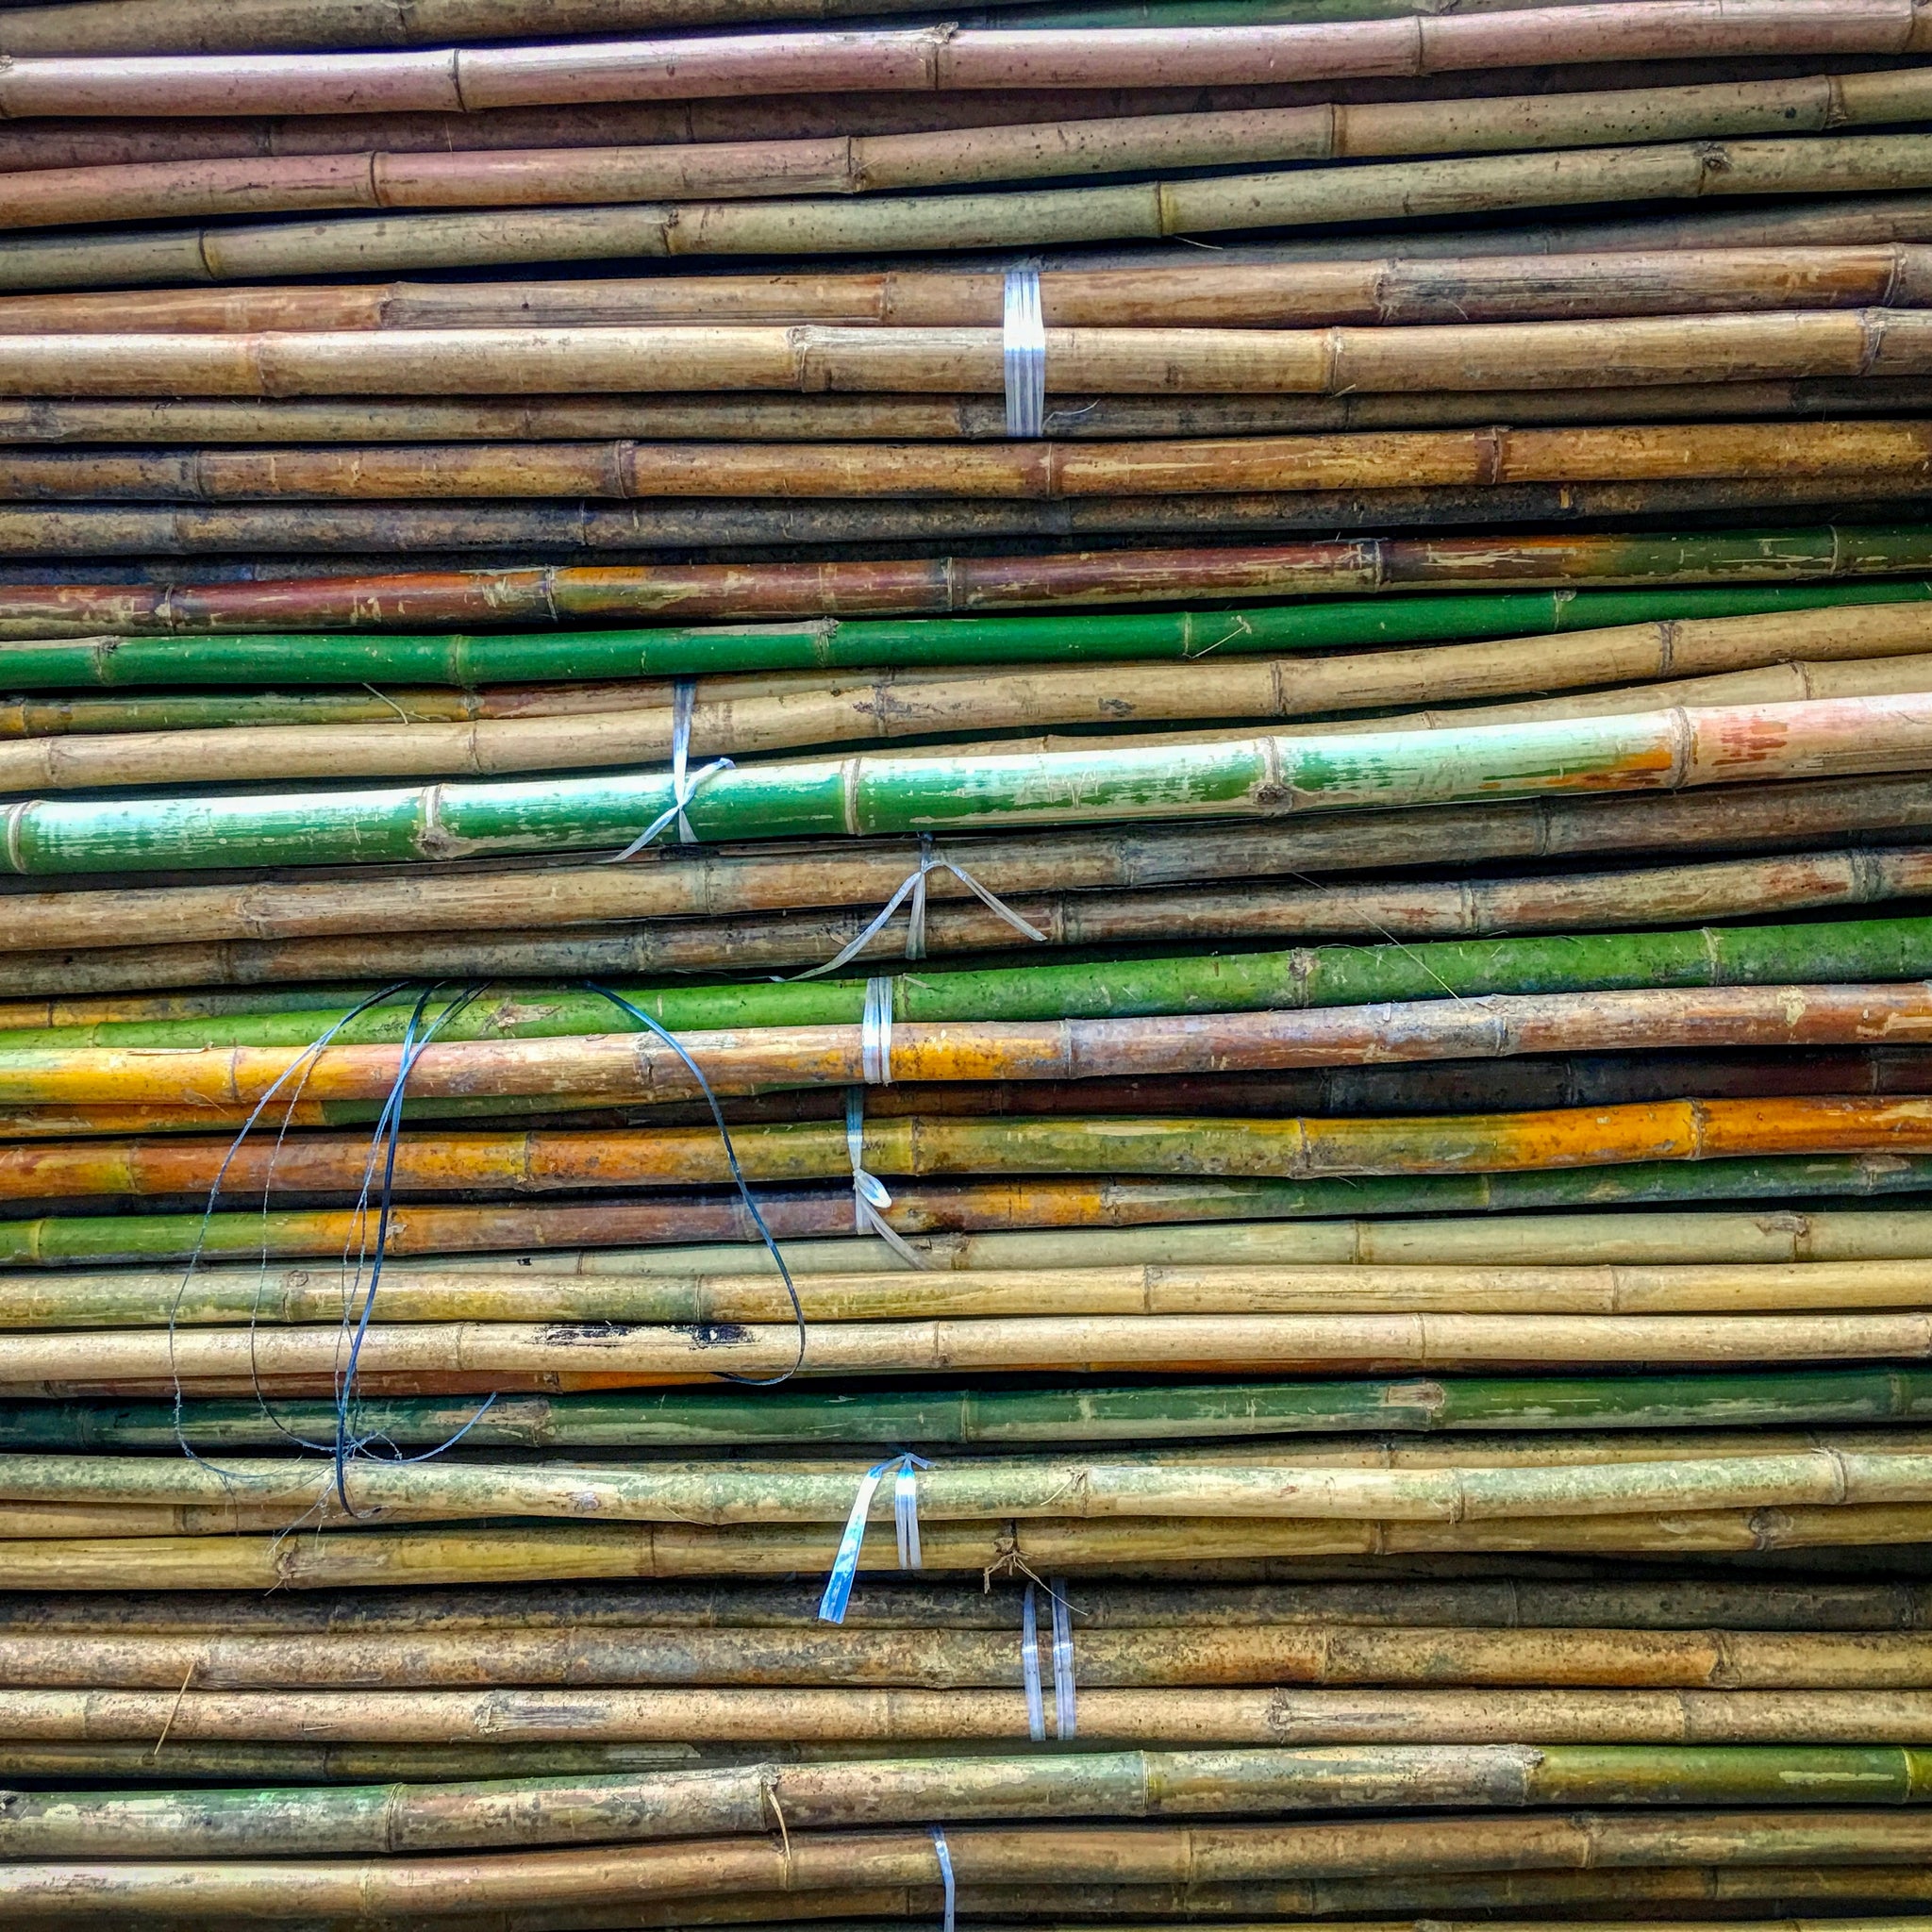 Cut sugar cane waiting to be processed